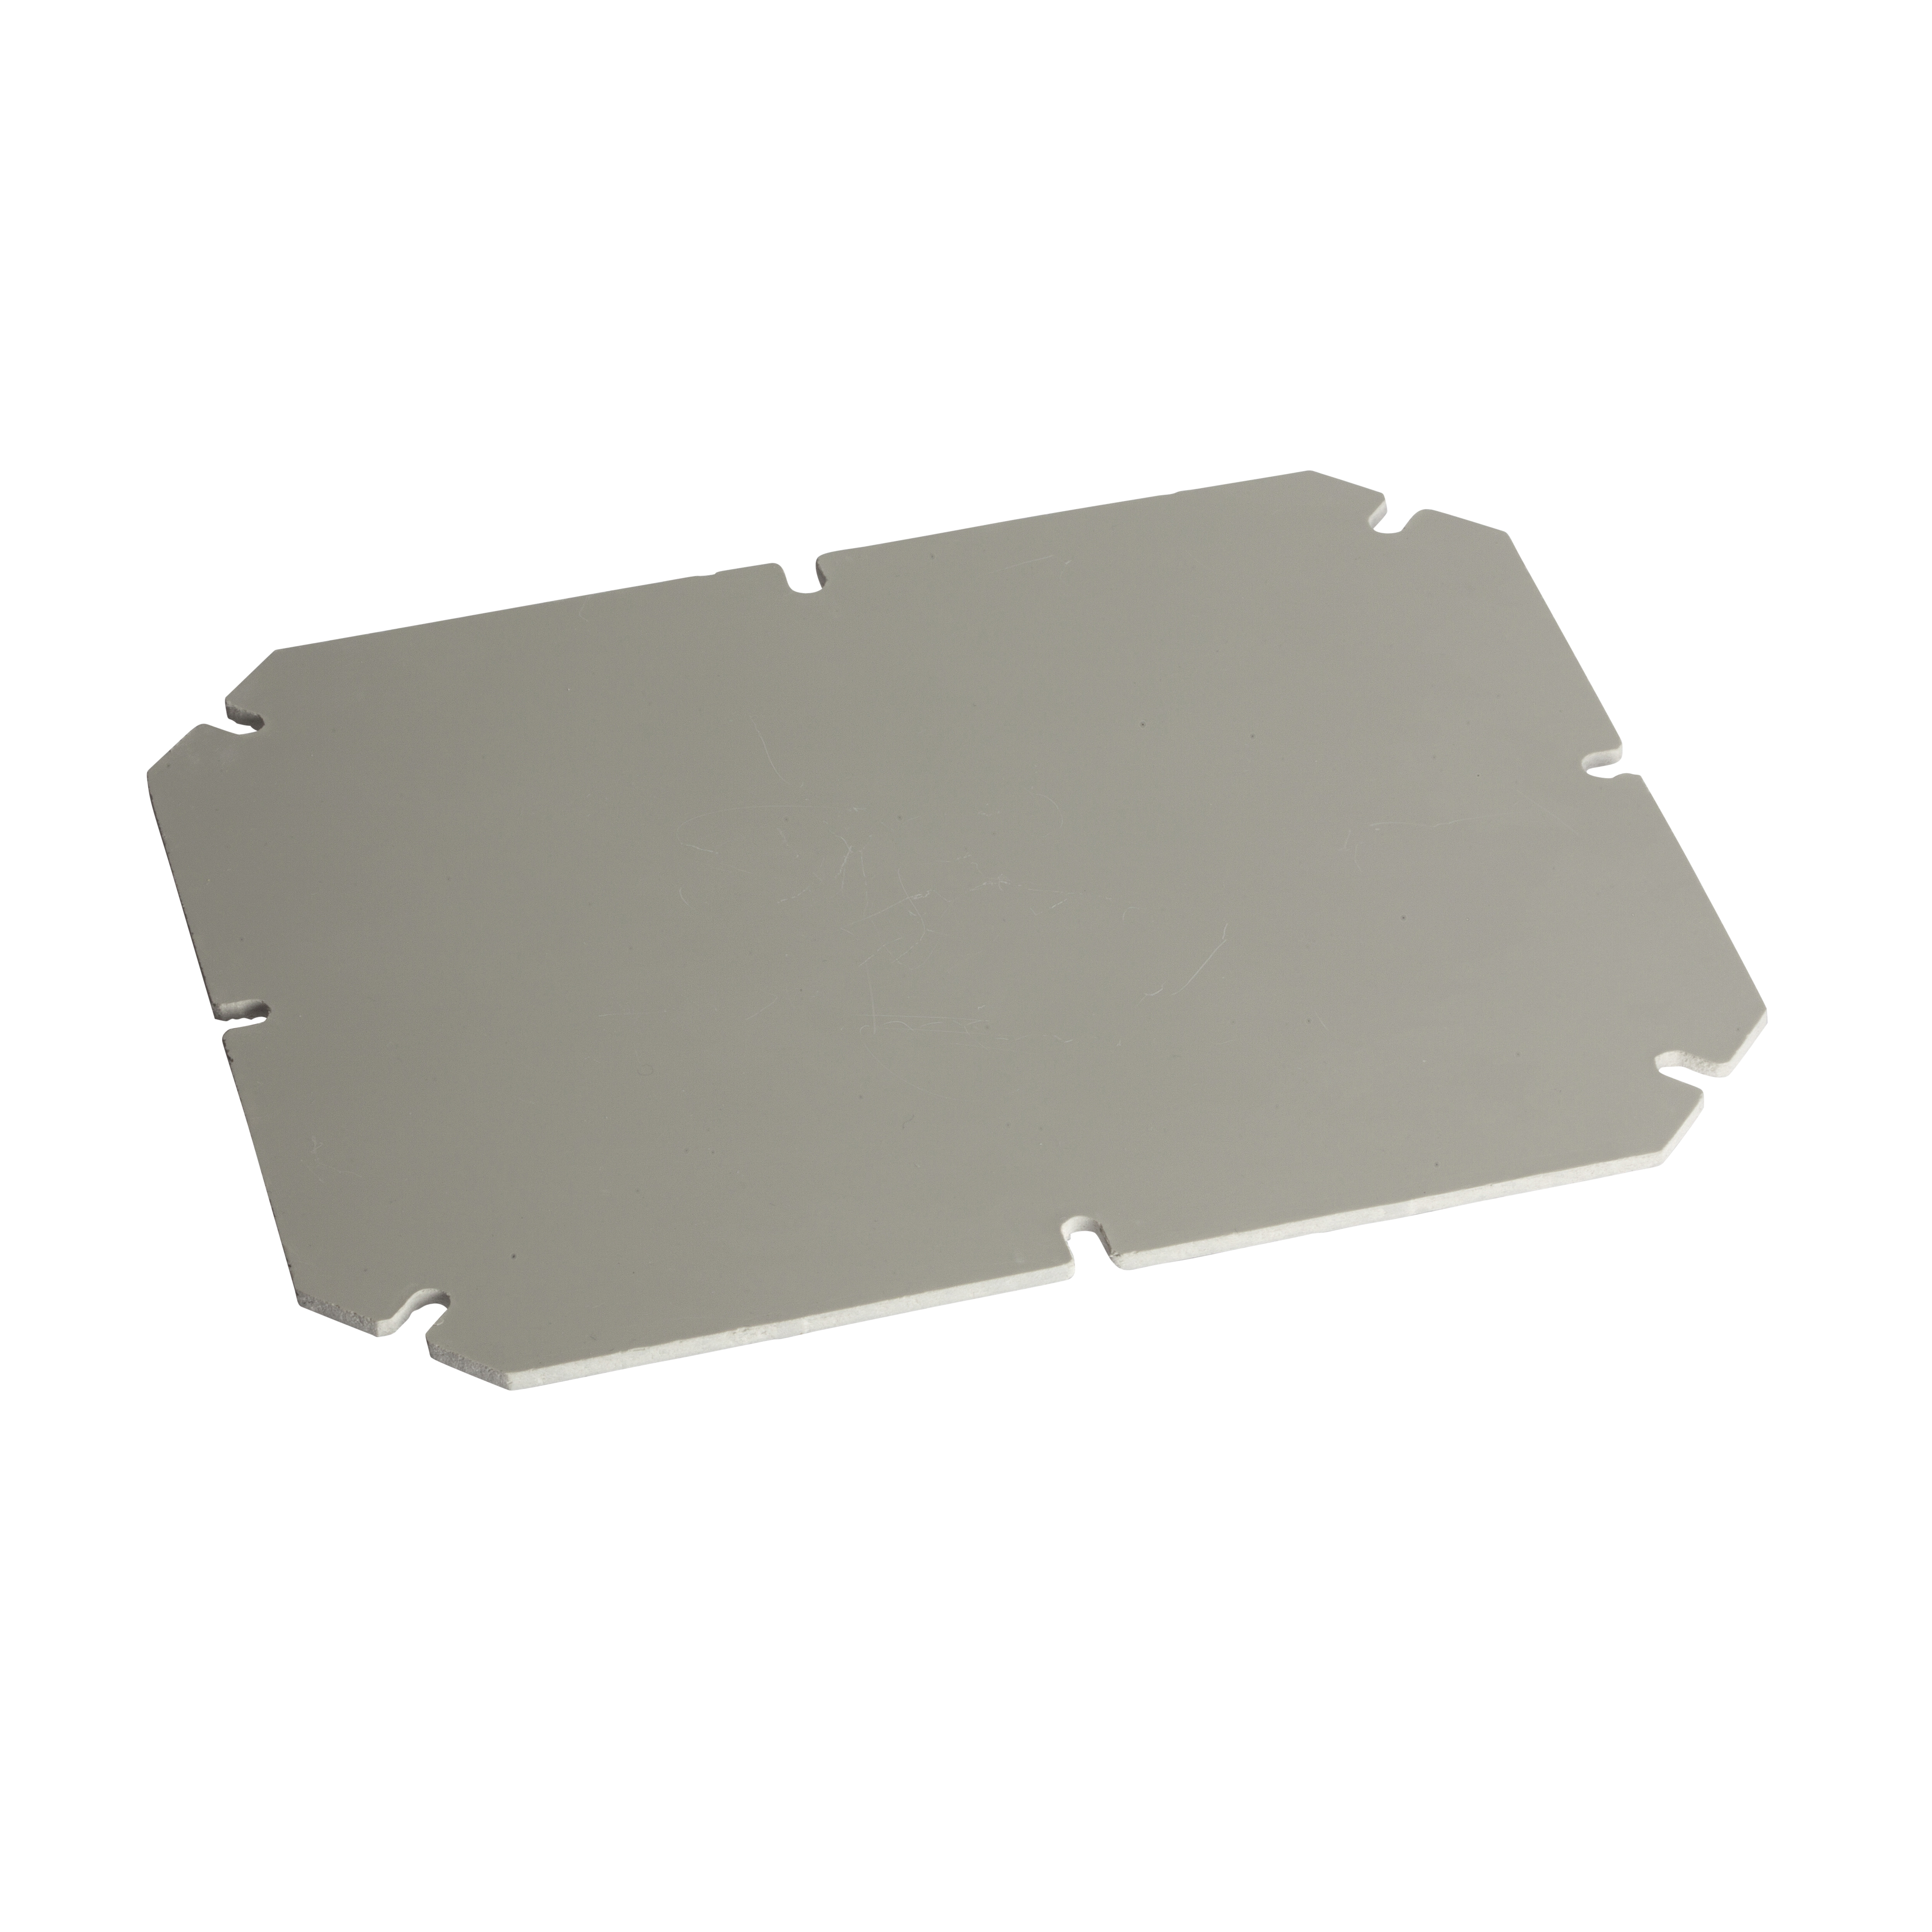 Steel mounting plate 341x291